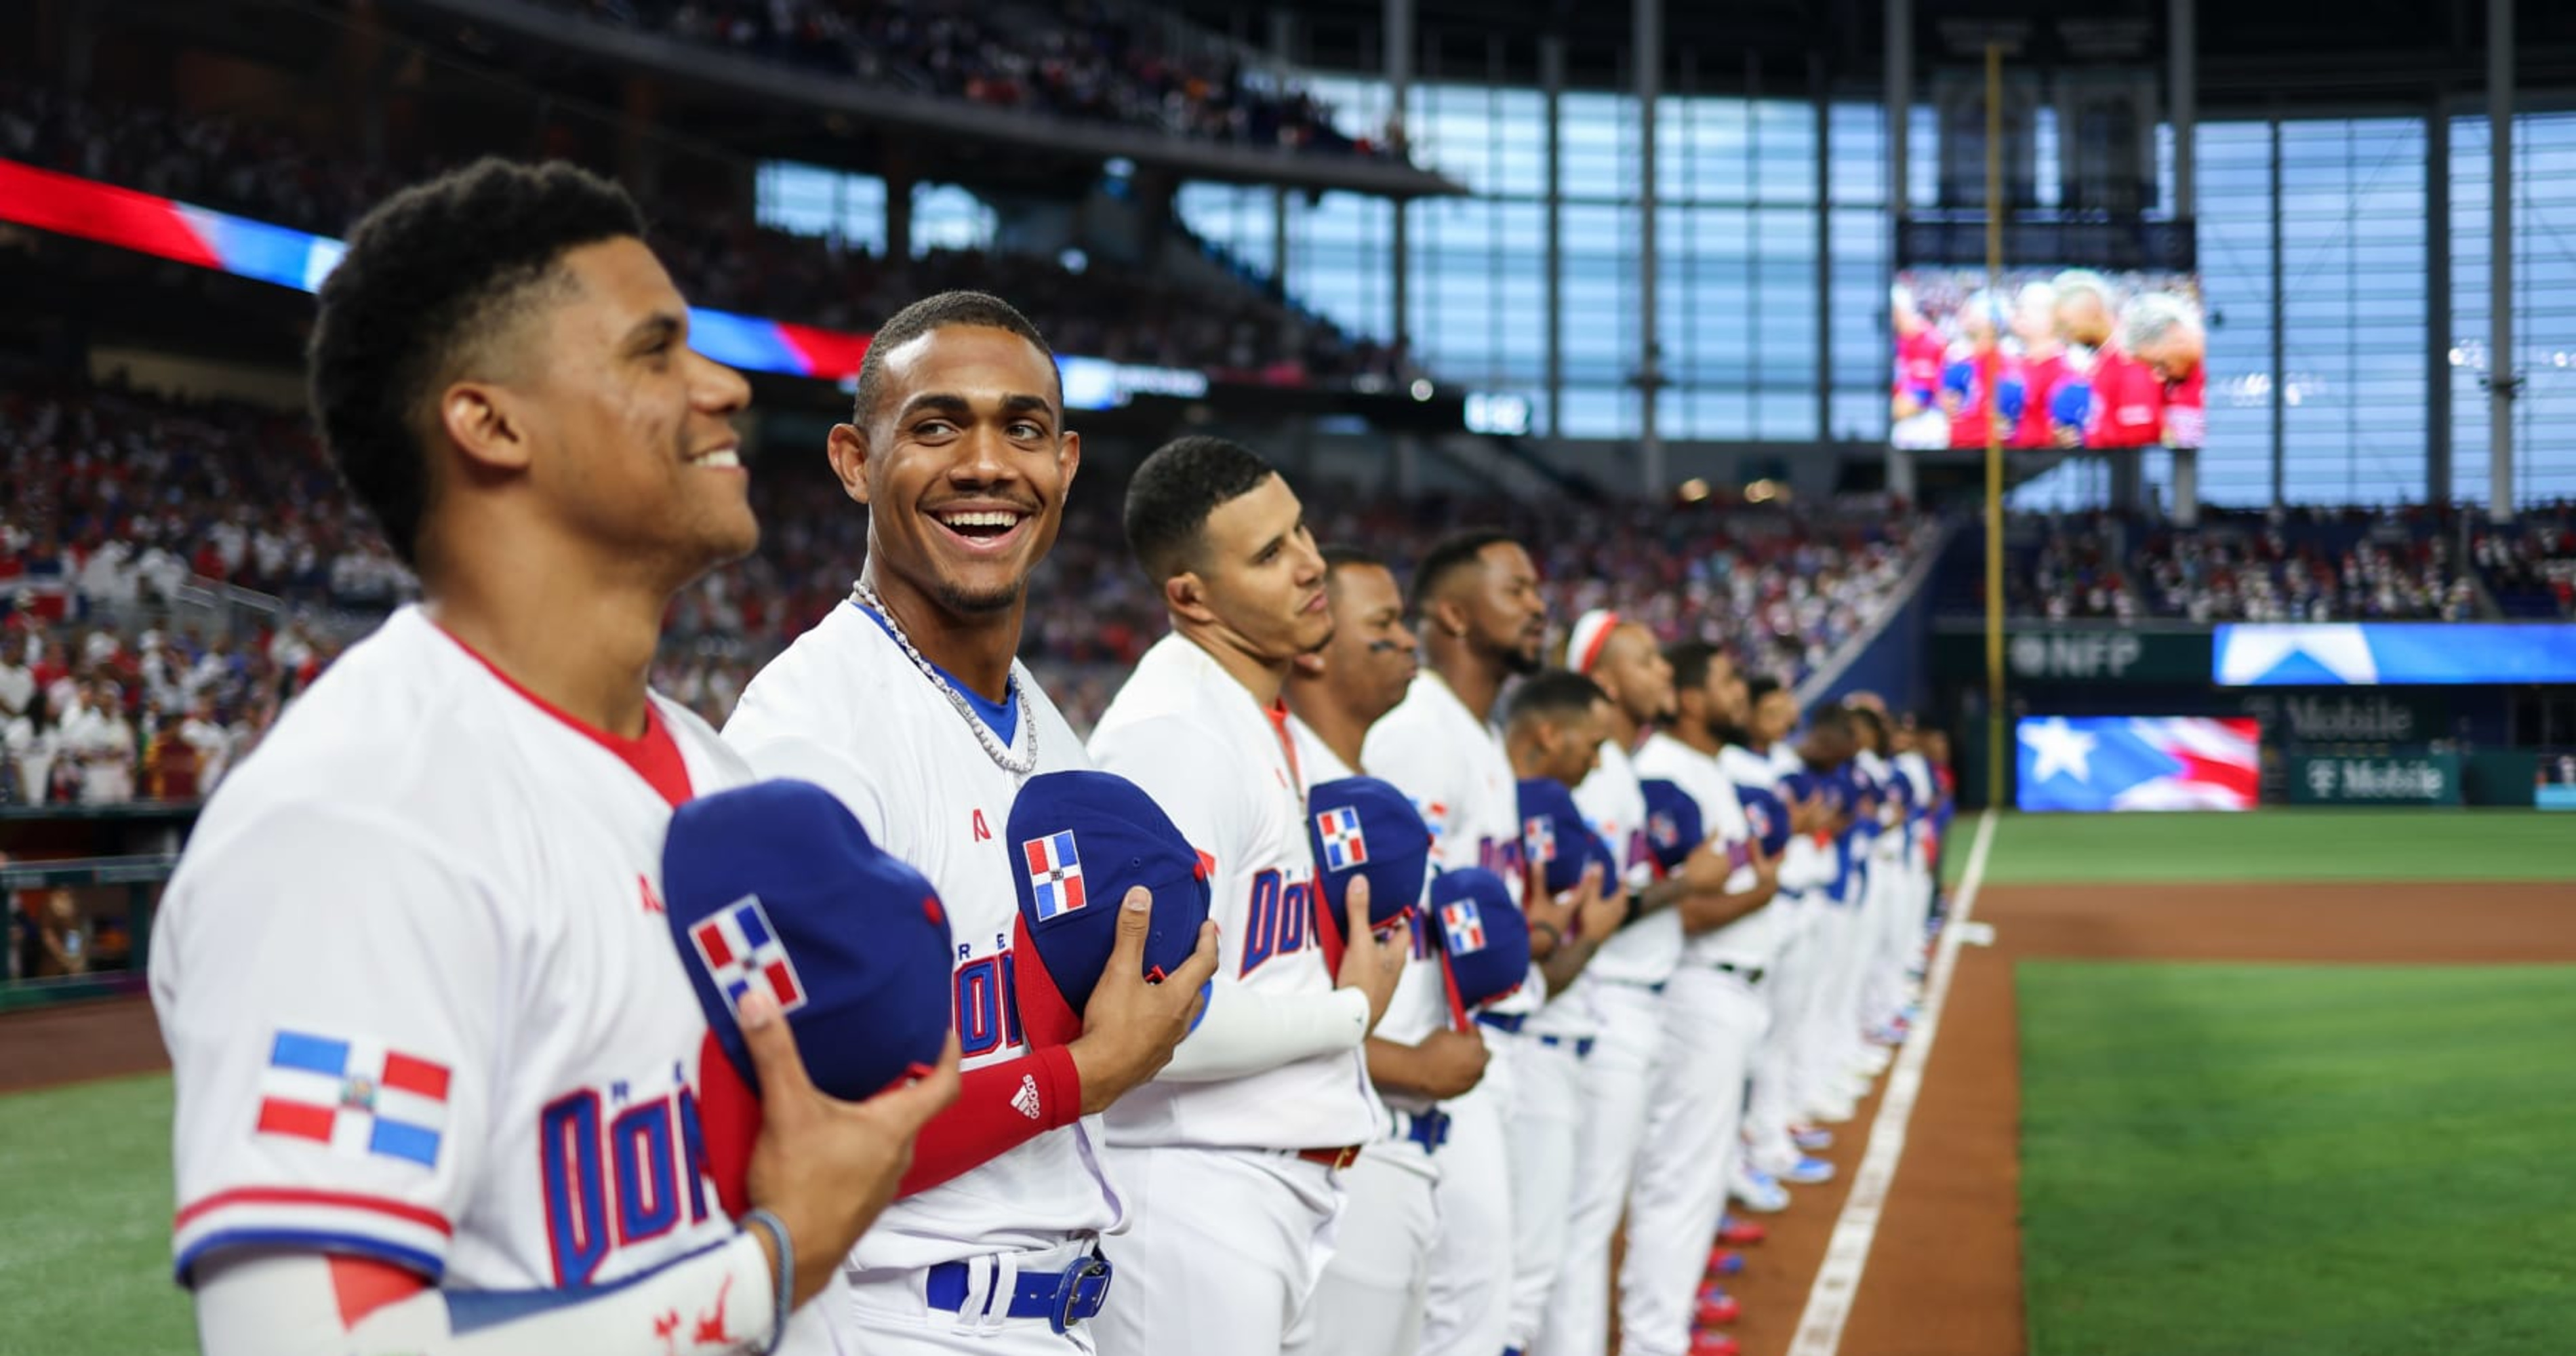 Dominican Republic Stuns MLB Twitter After Elimination from 2023 WBC in